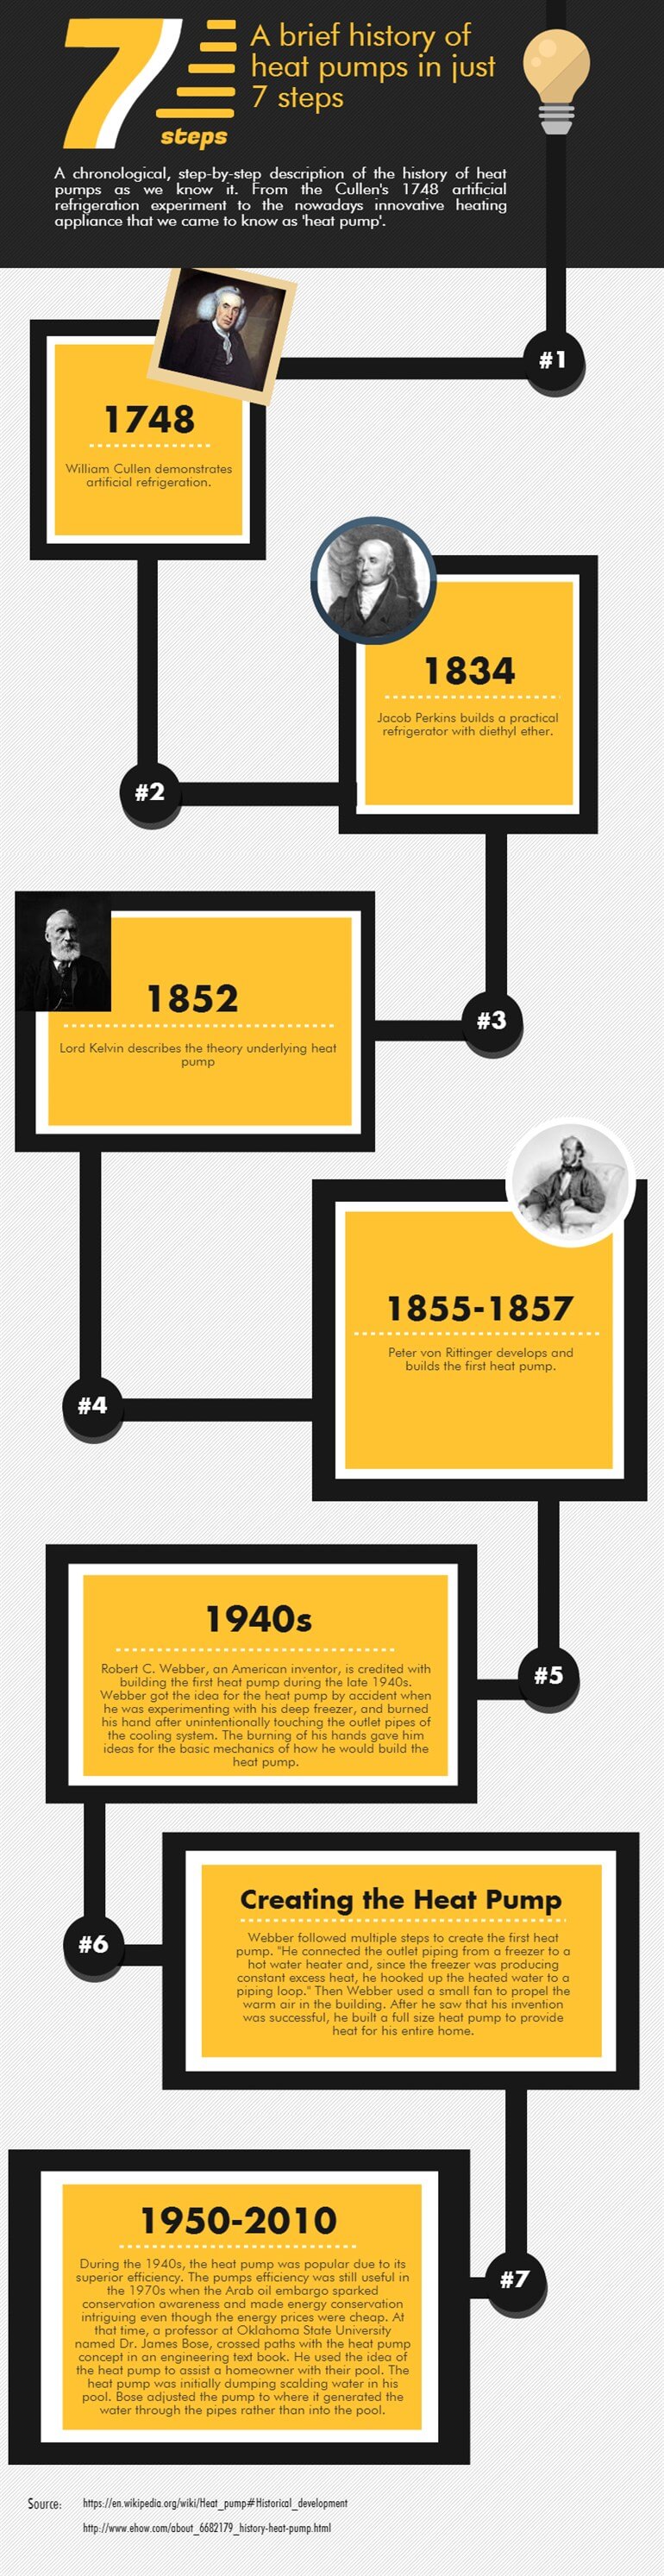 Infographic about history of heat pumps